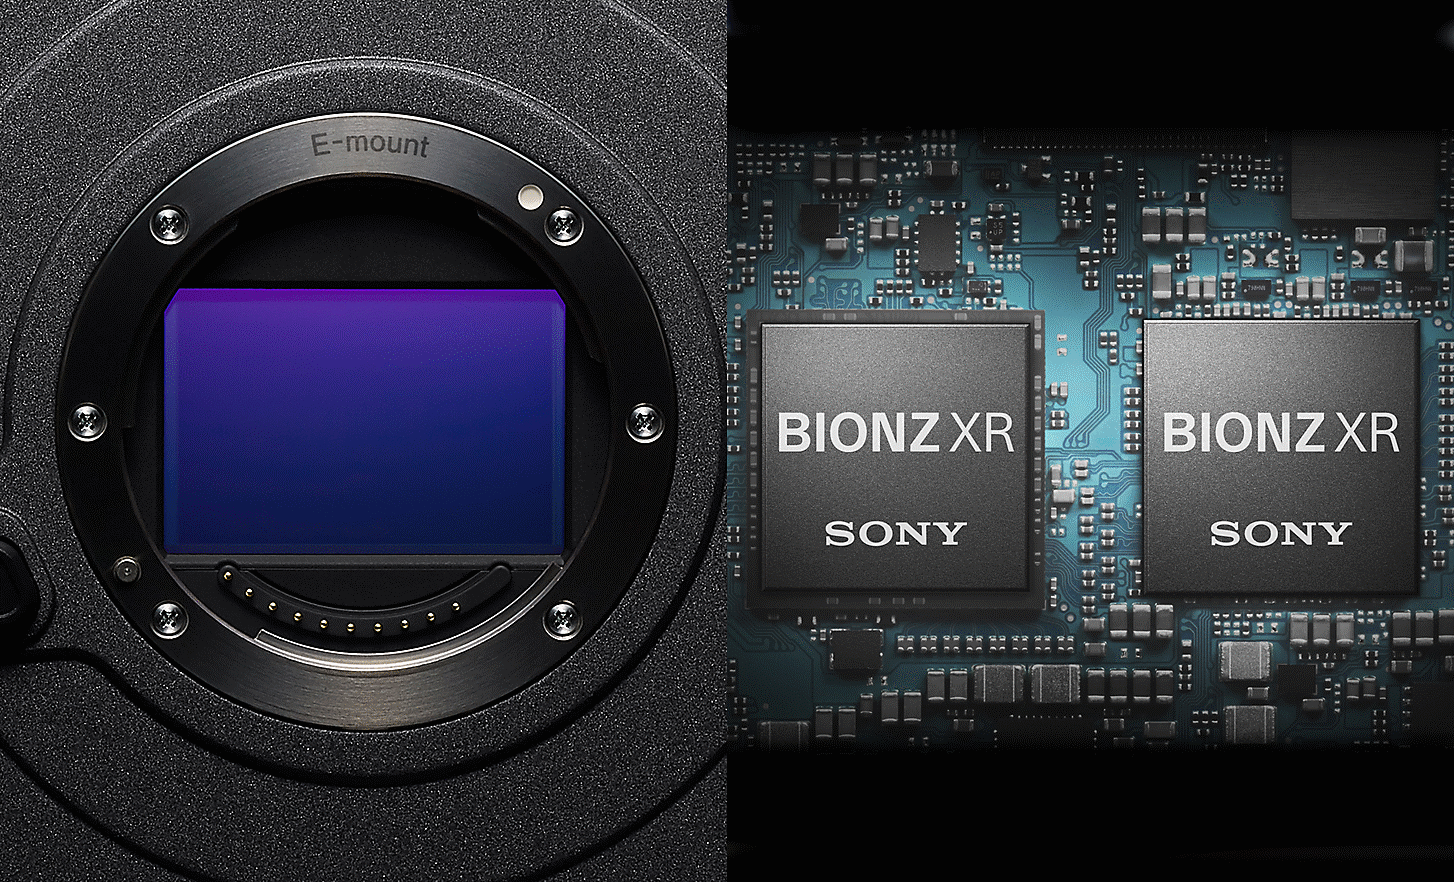 Image of the full-frame sensor and the BIONZ XR